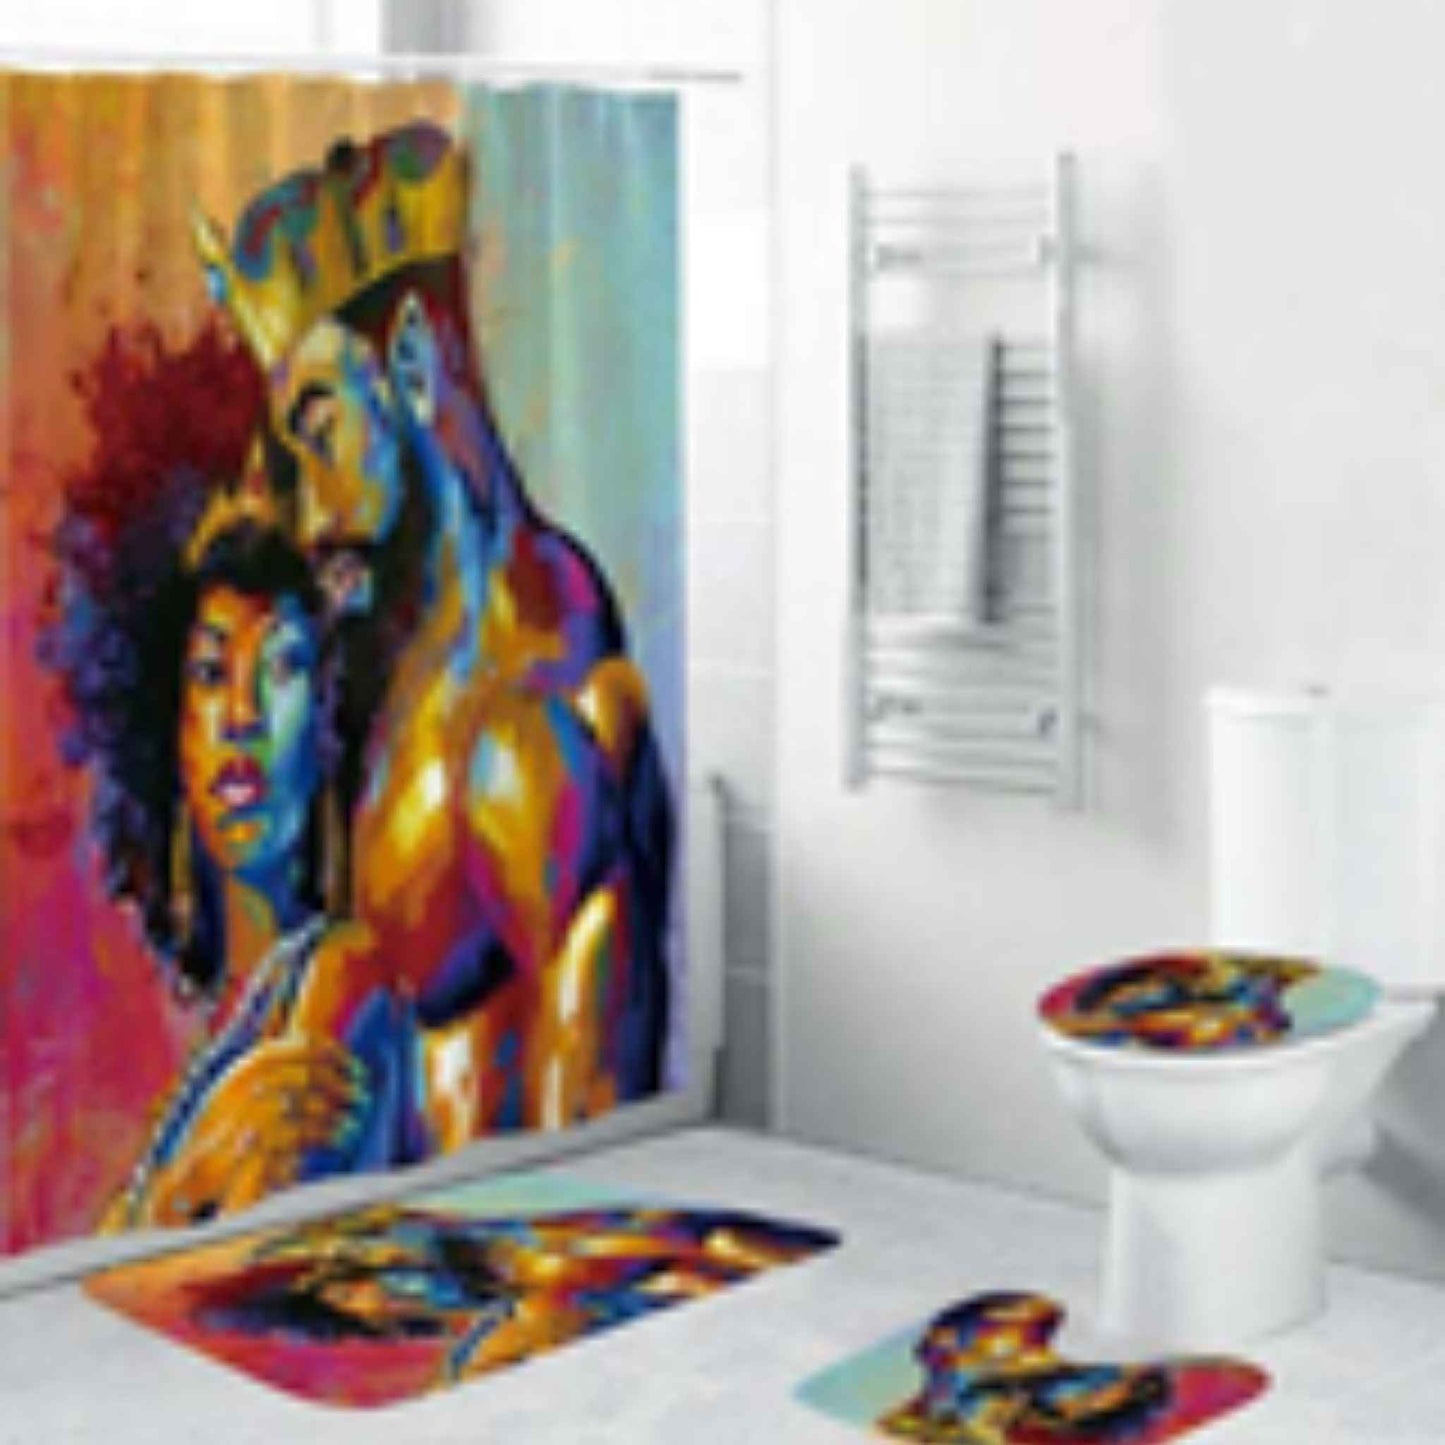 BTMR Home - King and his Queen Shower Curtain